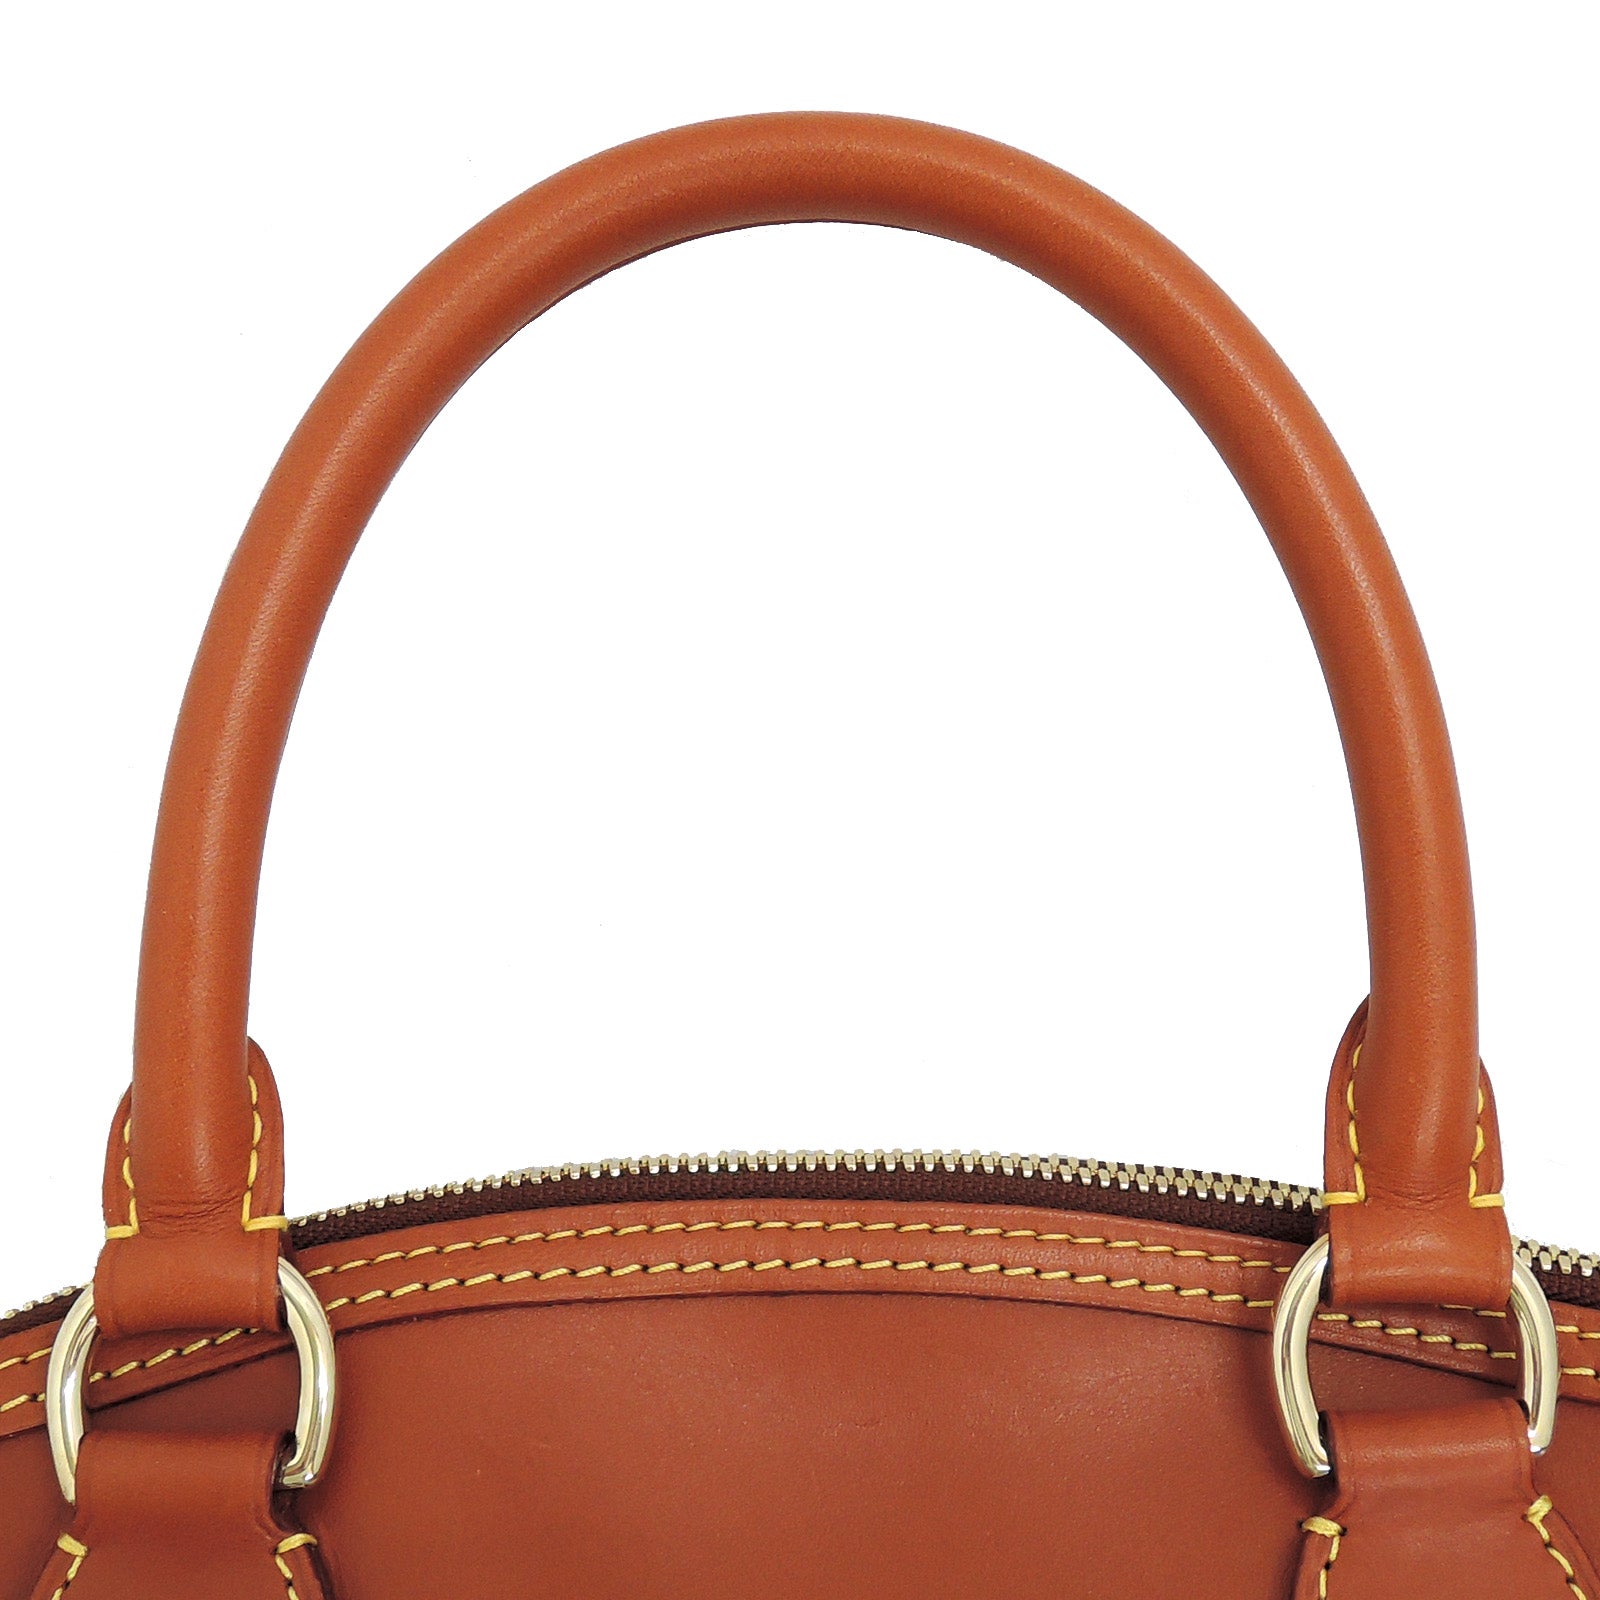 Lockit vertical leather tote Louis Vuitton Brown in Leather - 21640996